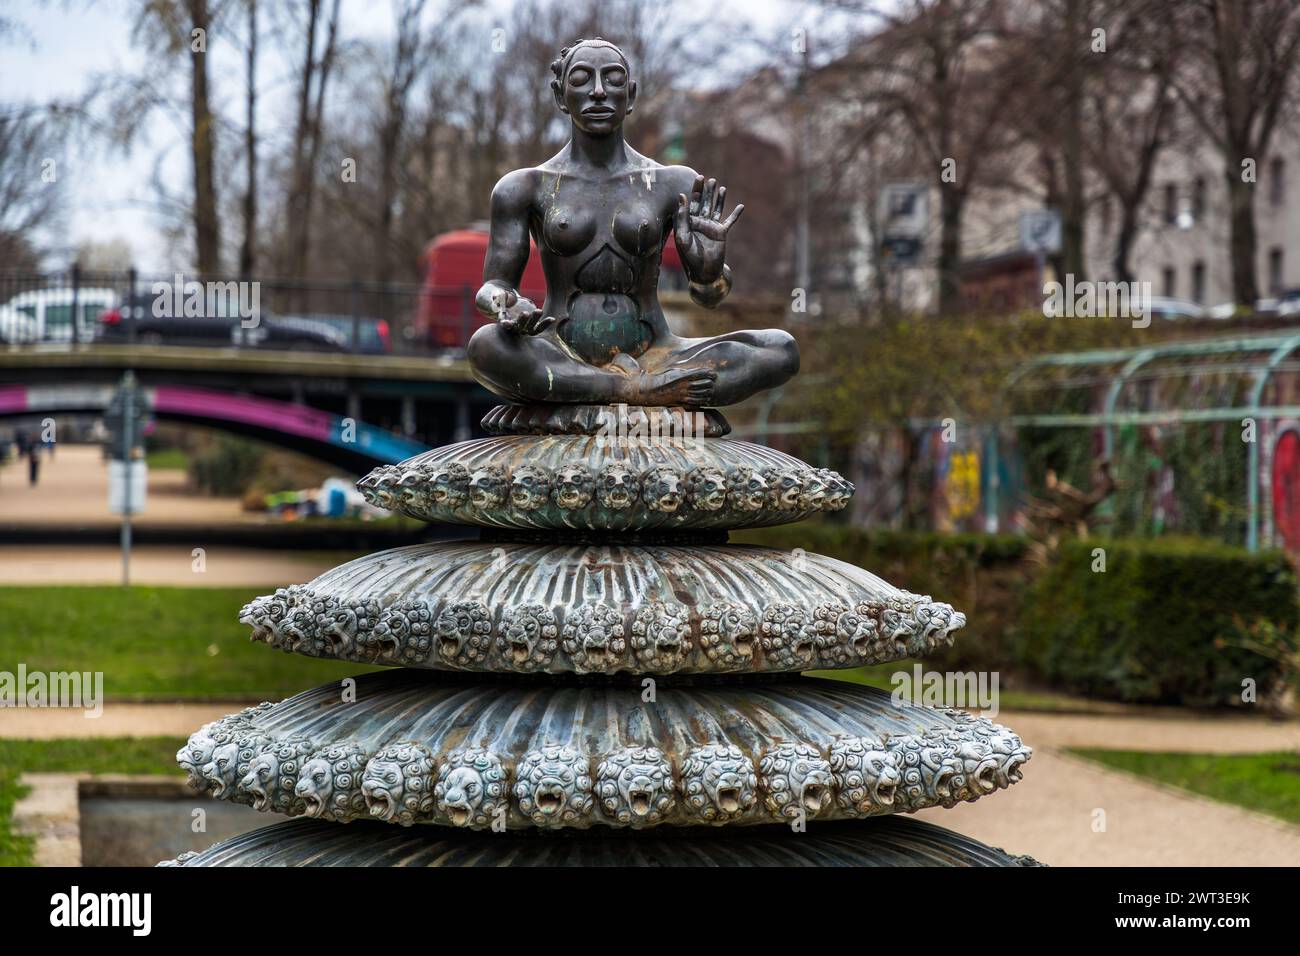 The fountain figure designed by Gerald Matzner on the Indian Fountain at the Engelbecken in Berlin is also known colloquially by Berliners as the female Buddha, Berlin, Germany Stock Photo